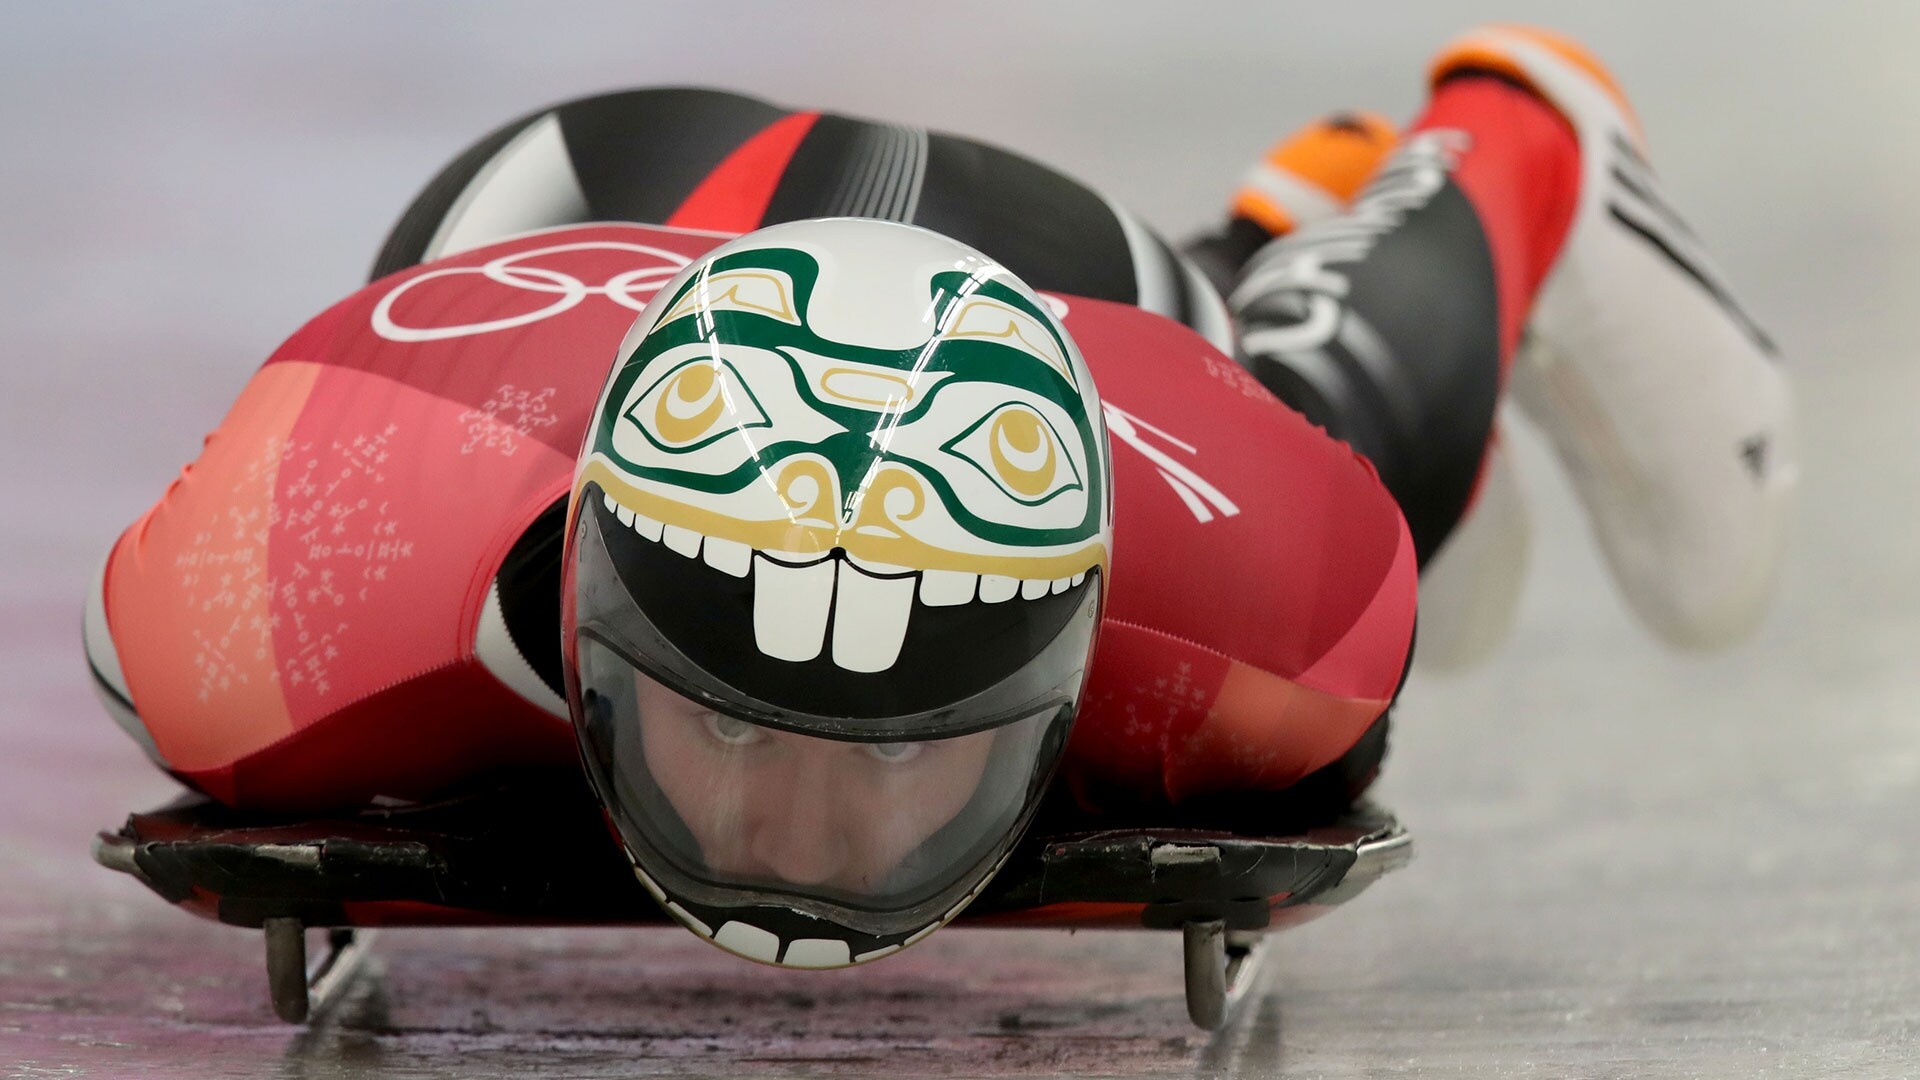 Skeleton (Sport): An athlete competes at the 2018 Winter Olympics wearing a custom helmet. 1920x1080 Full HD Background.